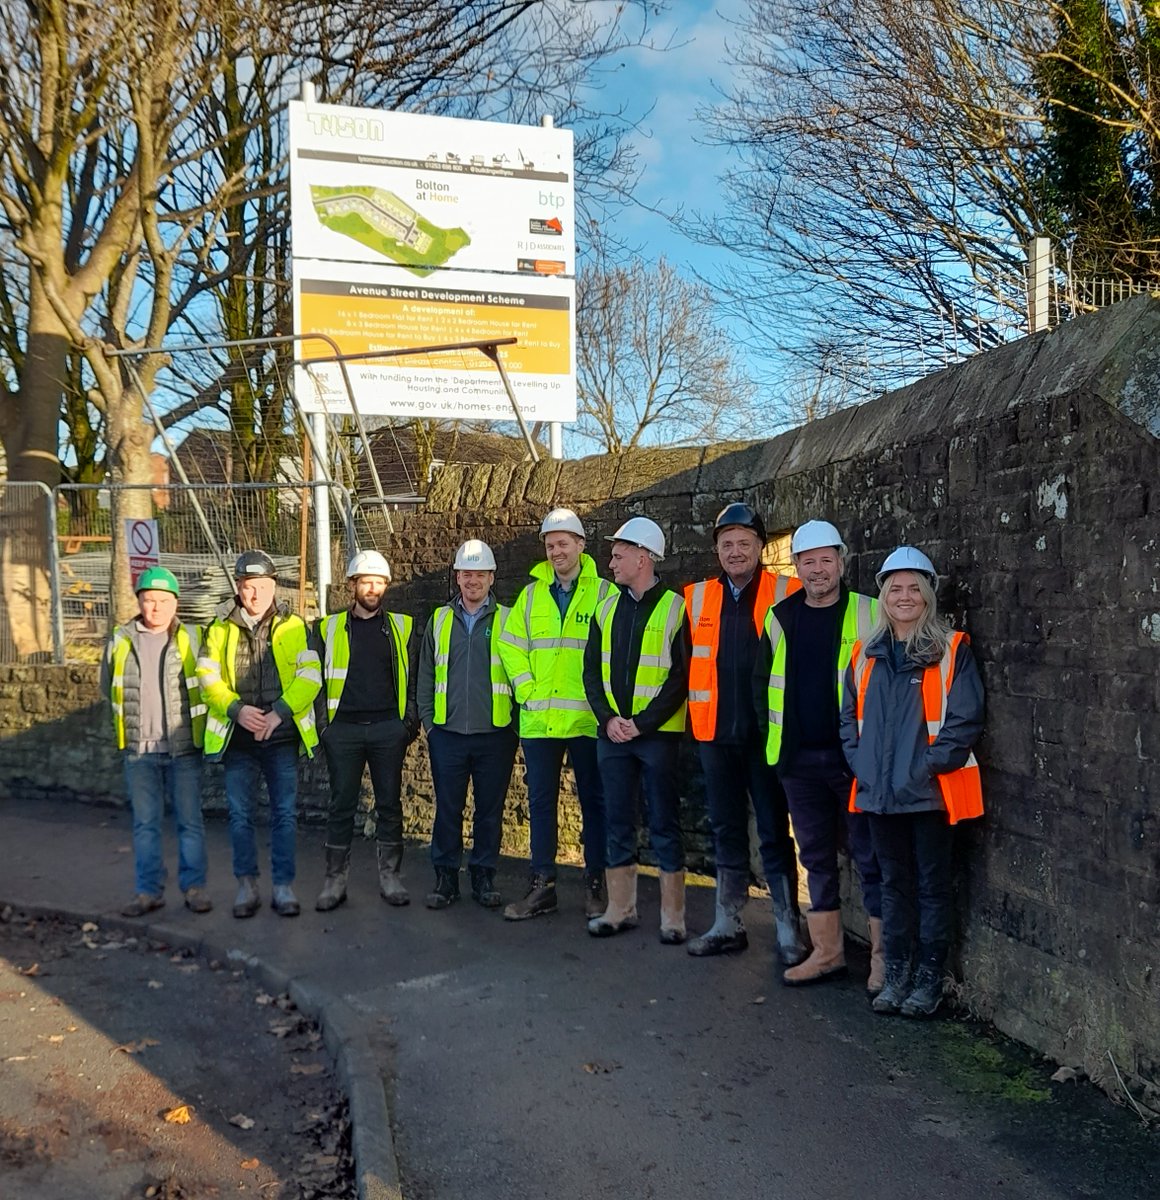 Great to break ground at our new development on Avenue St, Halliwell comprising of 44 new properties with 30 for affordable rent & 14 rent to buy in partnership with Tyson Construction @buildingwithyou BTP architects @BTP_Architects & grant funding from @HomesEngland